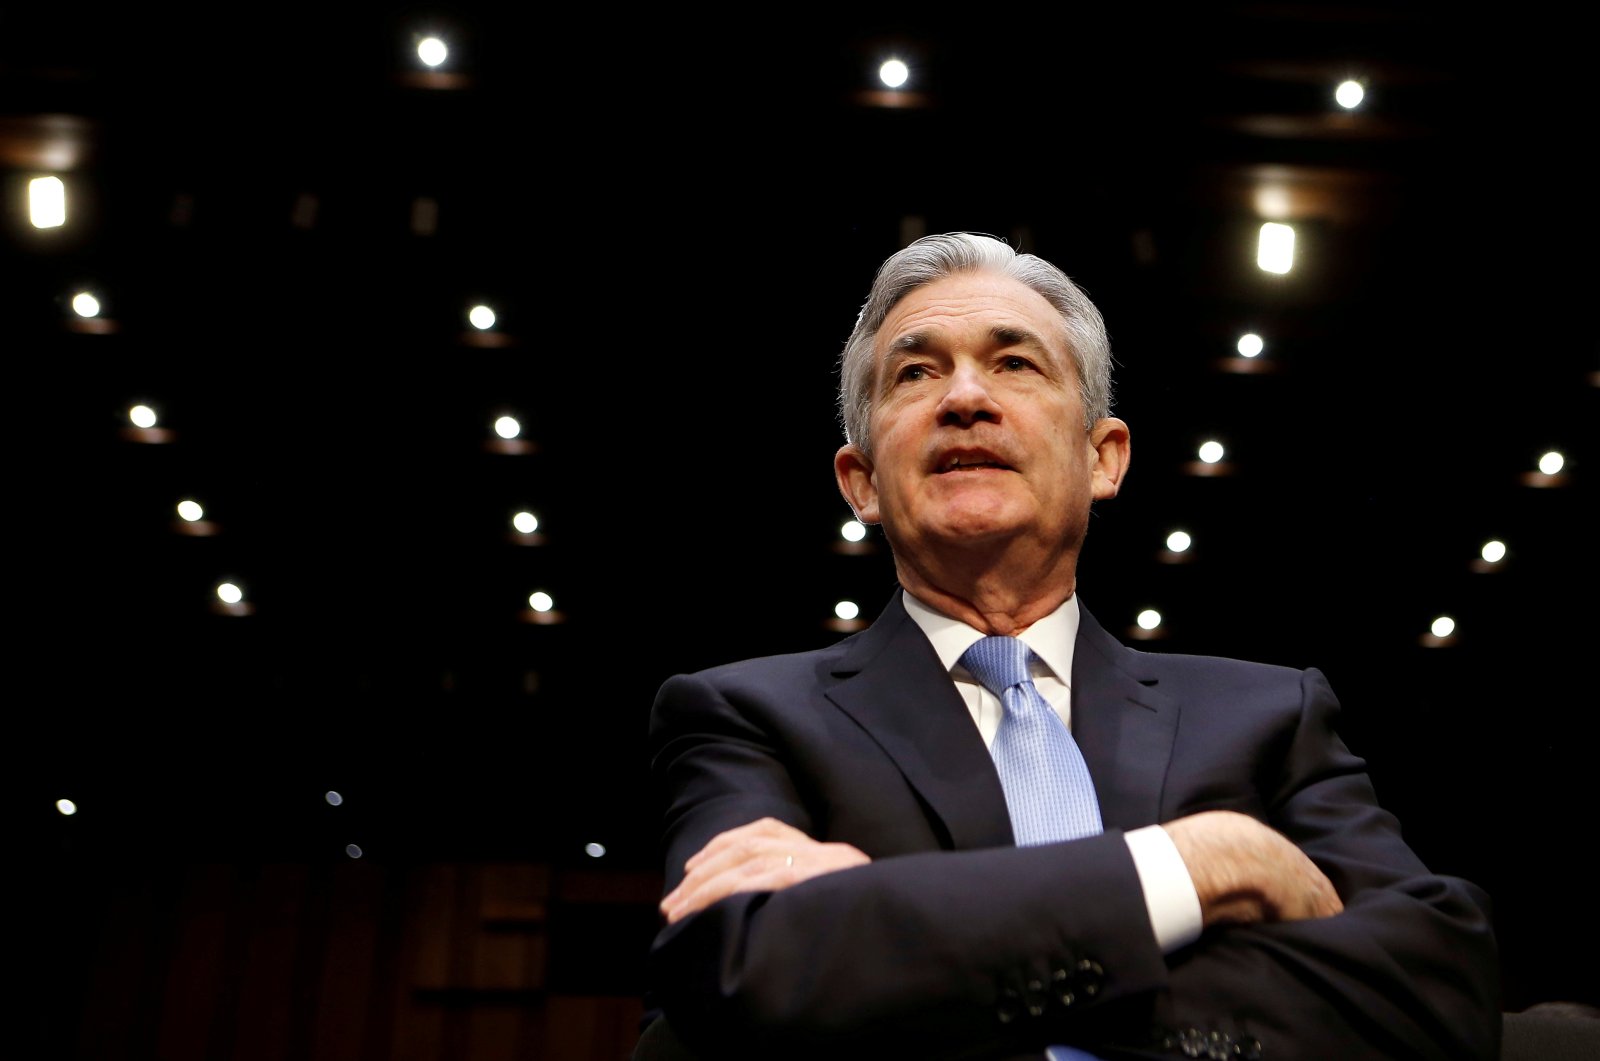 Jerome Powell waits to testify before the Senate Banking, Housing and Urban Affairs Committee on his nomination to become chair of the U.S. Federal Reserve in Washington, U.S., Nov. 28, 2017. (Reuters Photo)